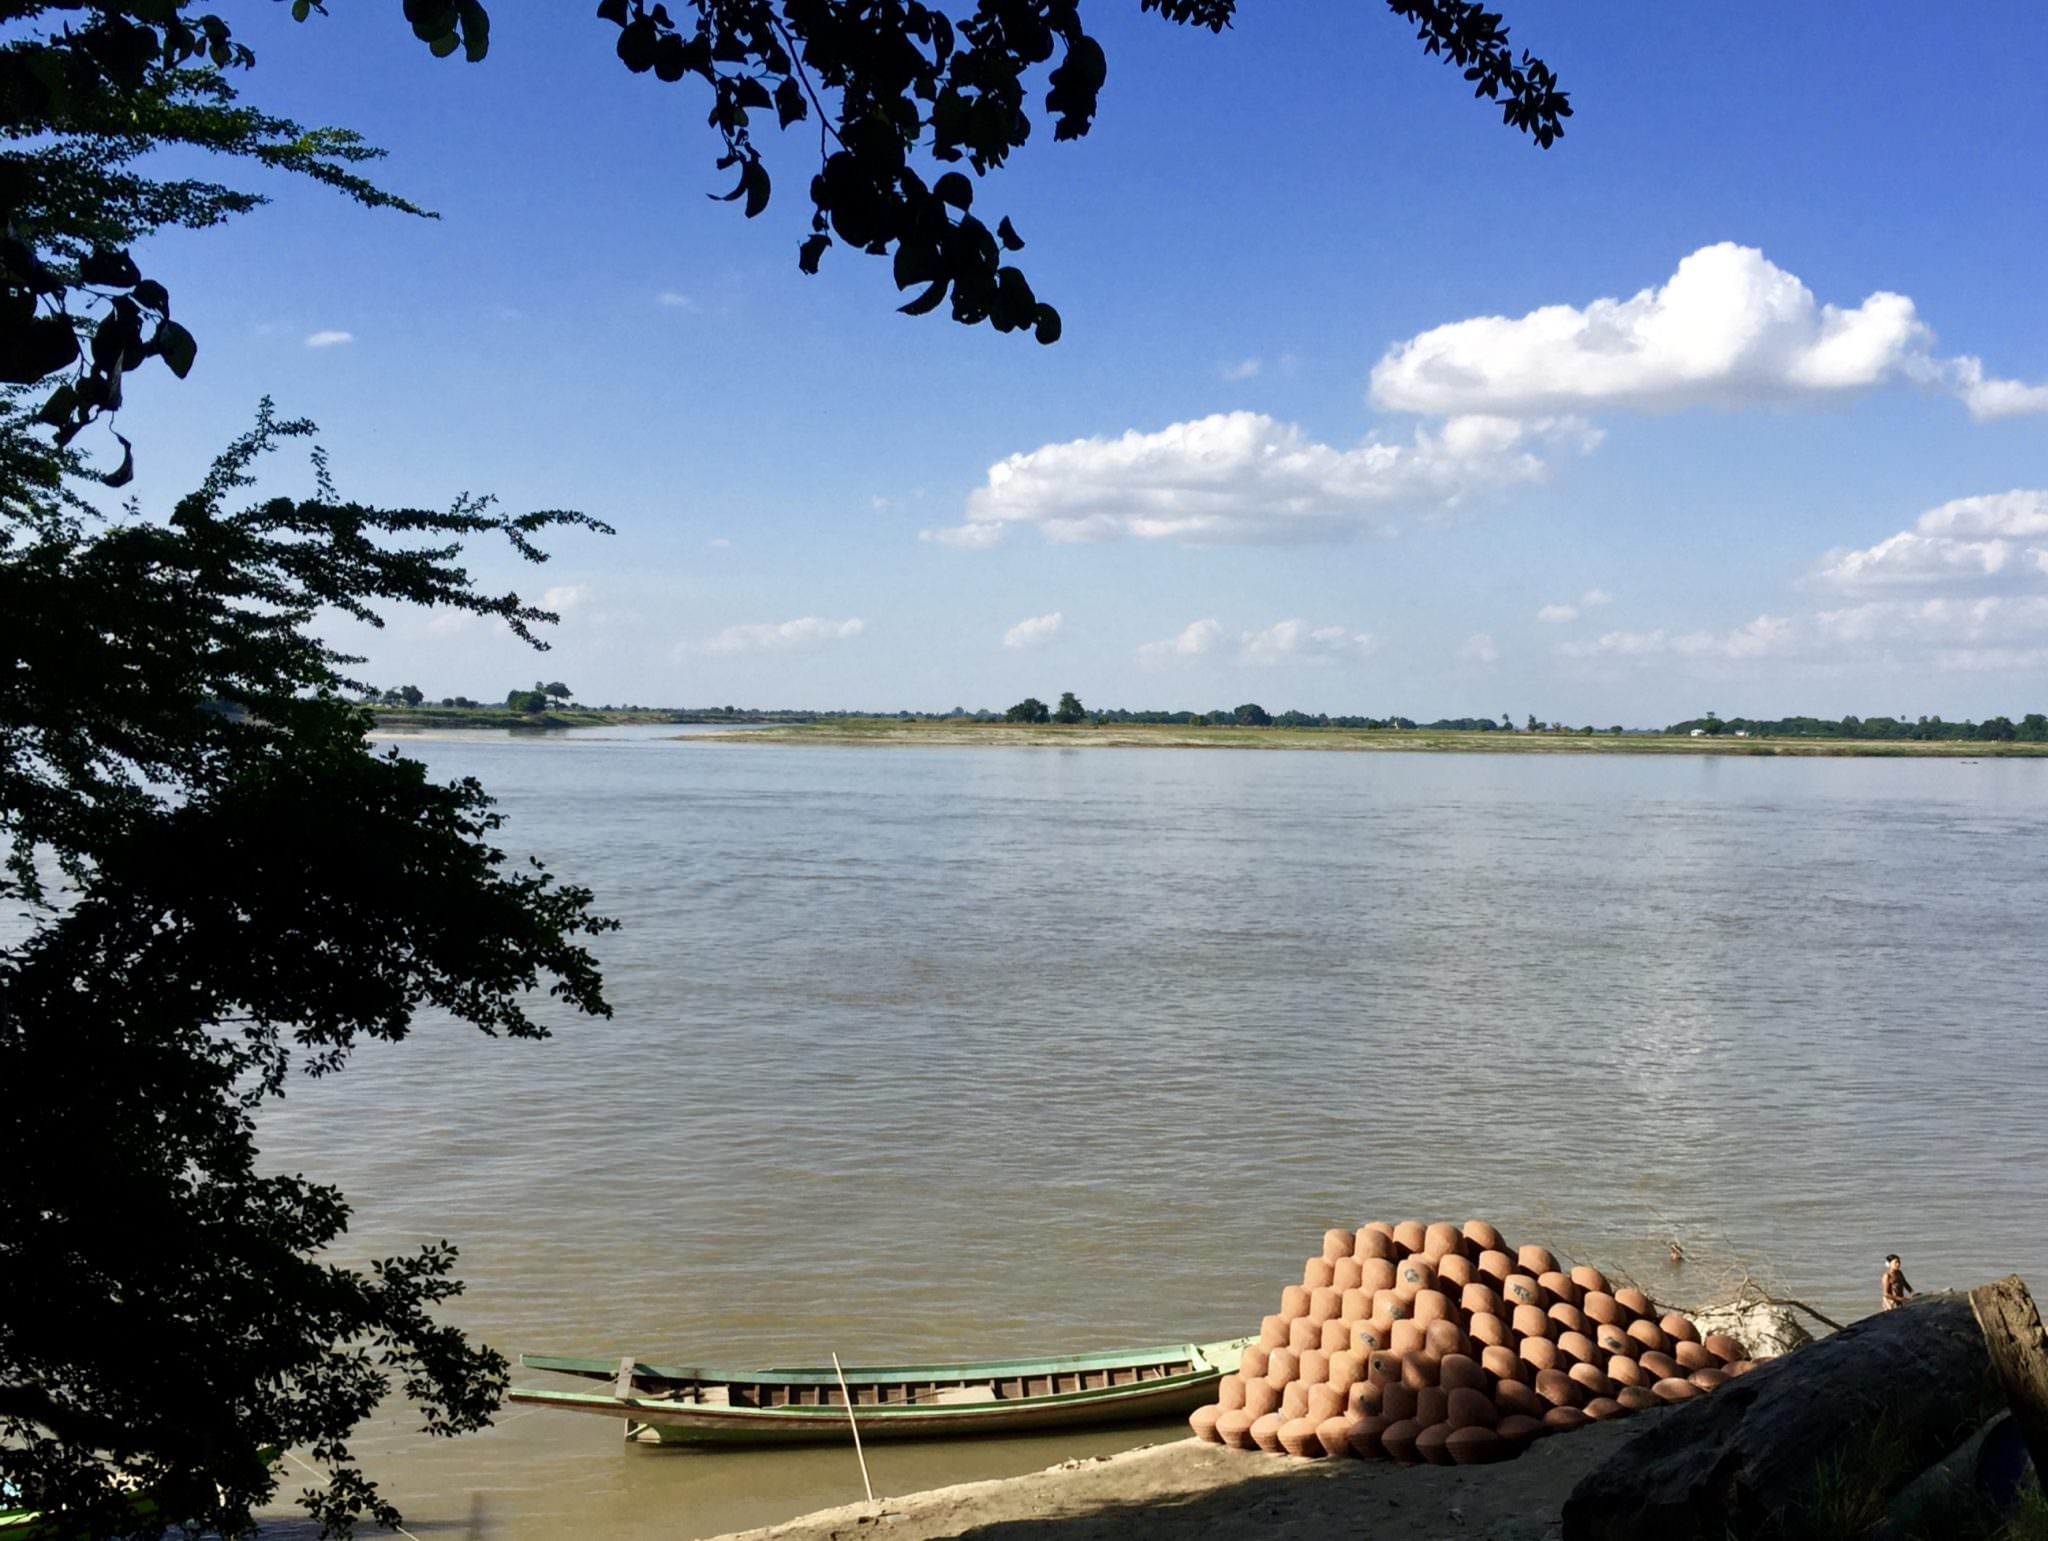 On the bank of the Irrawaddy, completed pots are waiting for export. © 2015 Gail Jessen